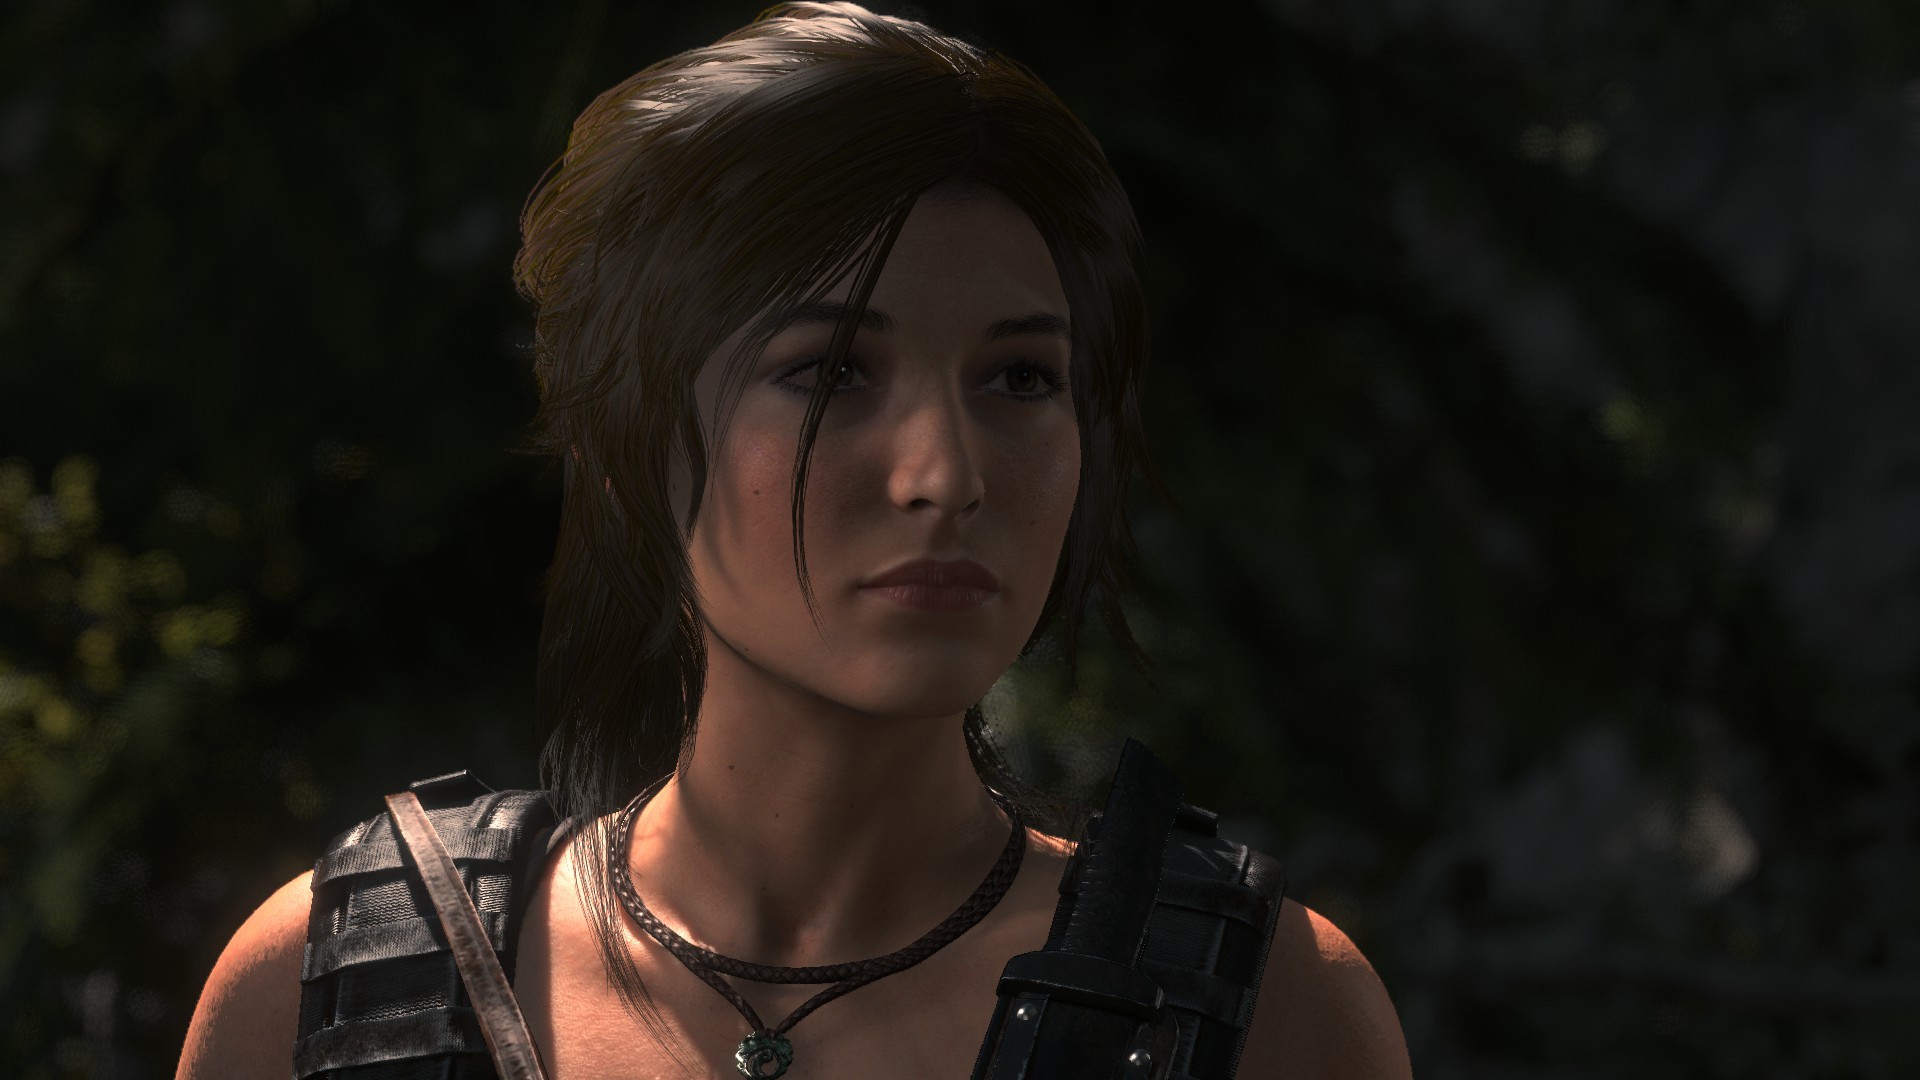 General 1920x1080 Tomb Raider Rise of the Tomb Raider Ultra Settings GTX 980 screen shot video games video game girls PC gaming Lara Croft (Tomb Raider) face closeup hair in face video game characters